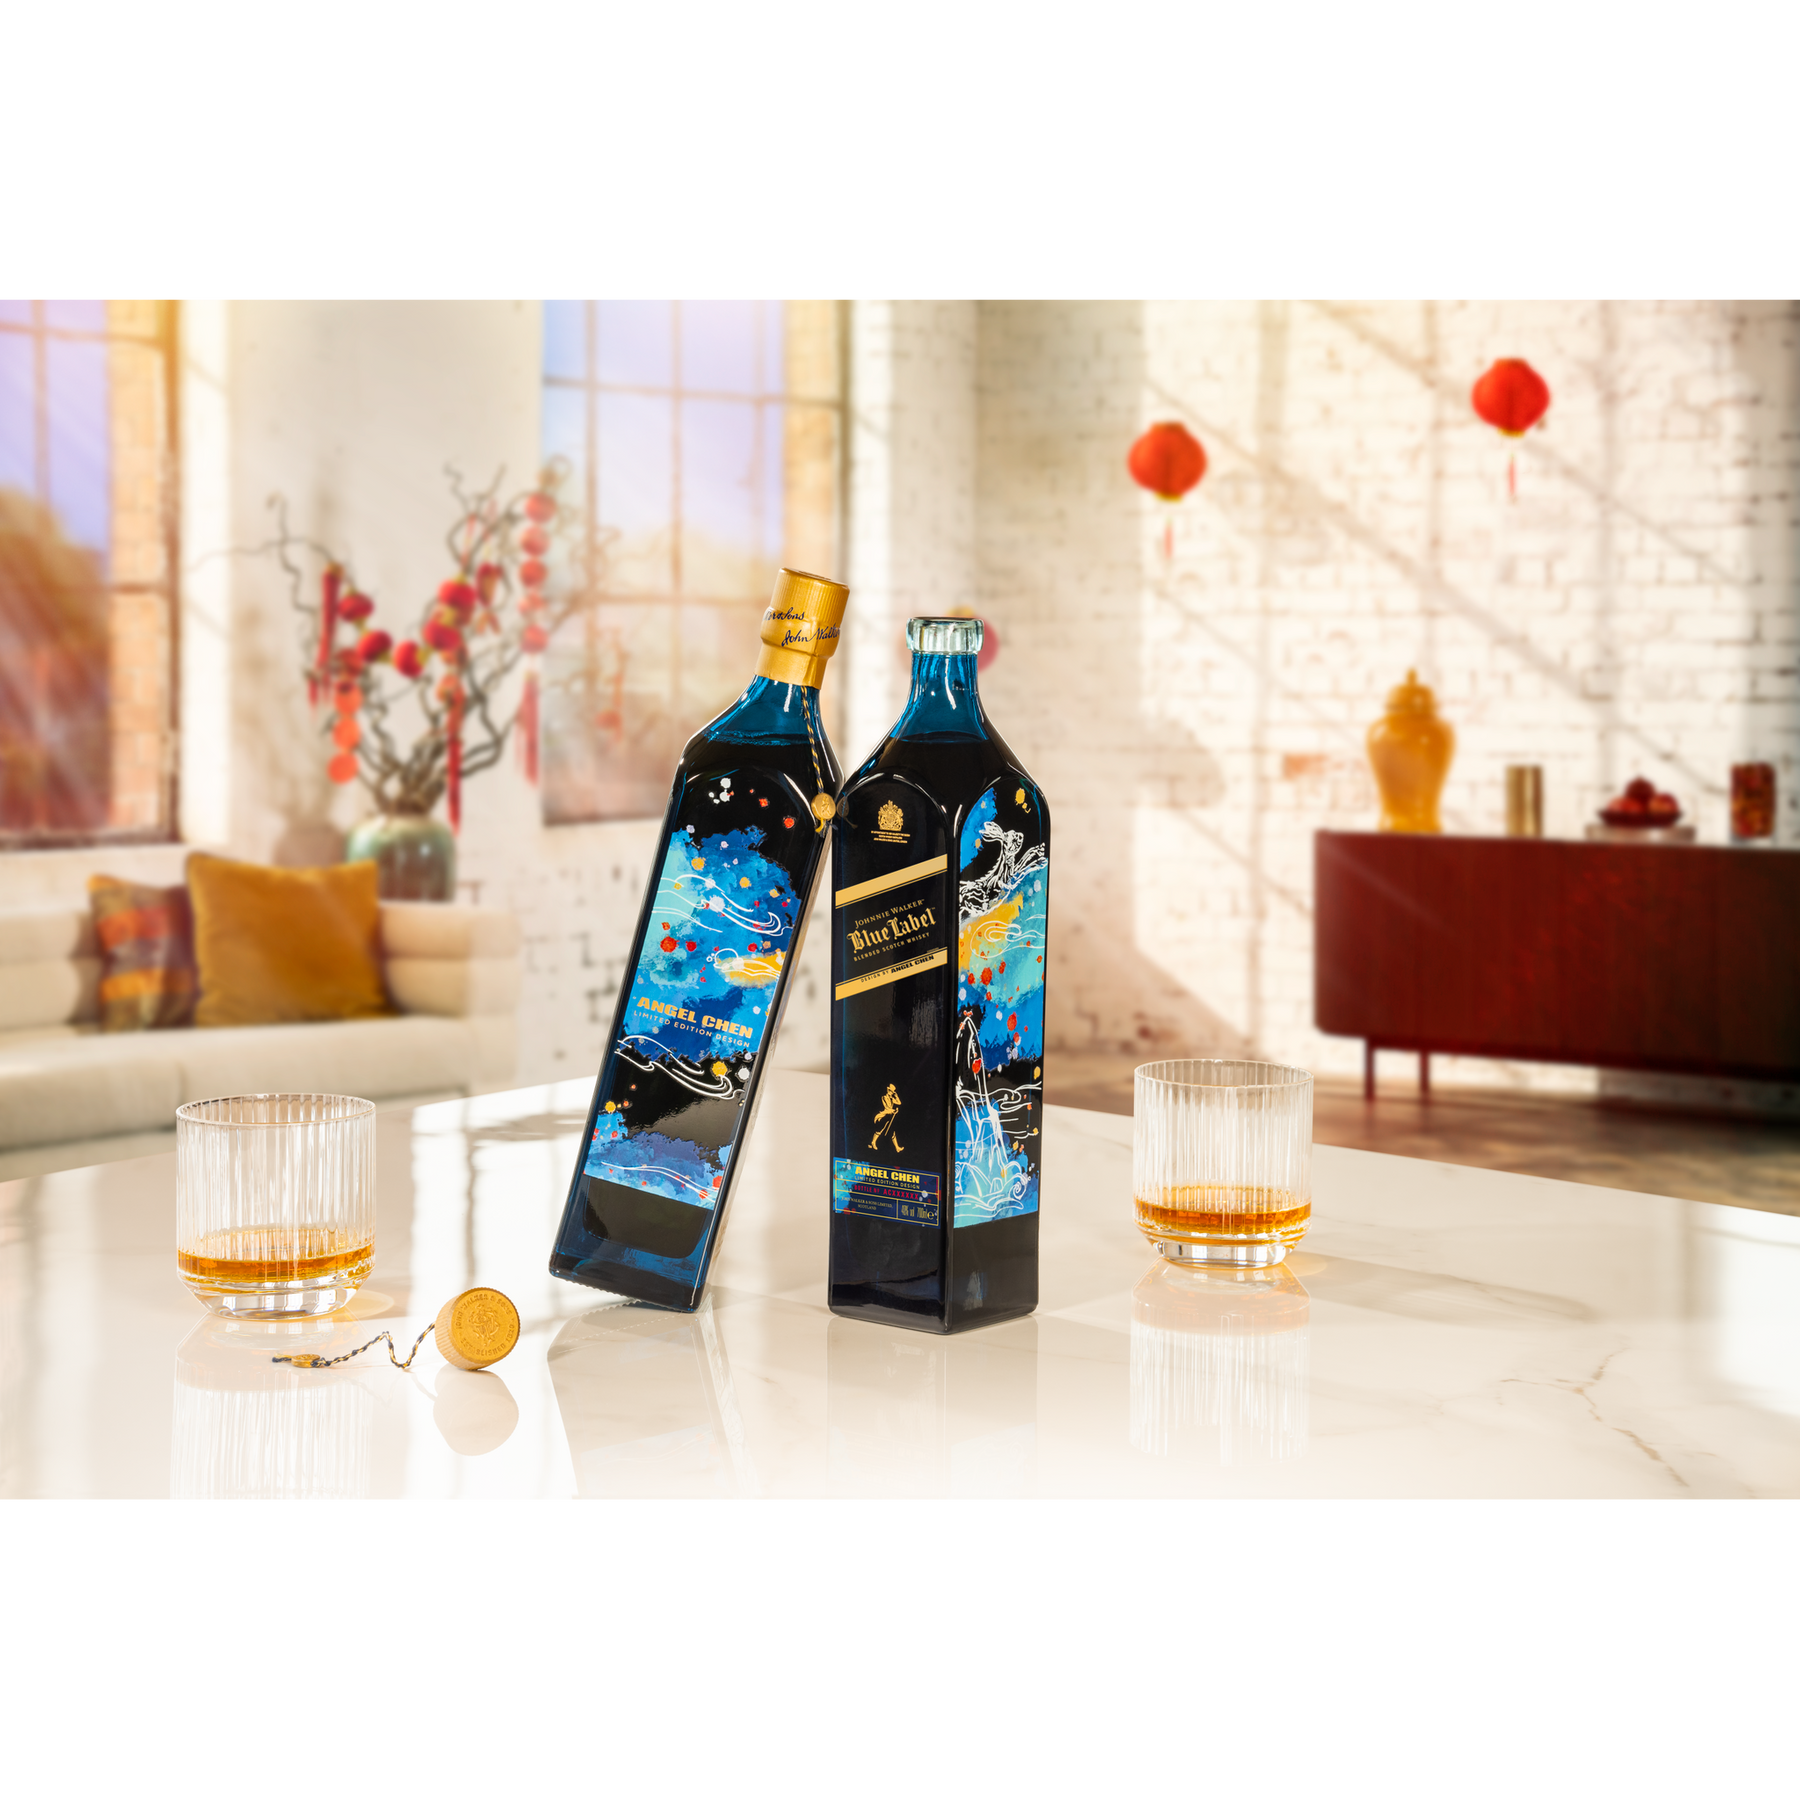 Johnnie Walker Blue Year Of The Rabbit Limited Edition Whisky 1L